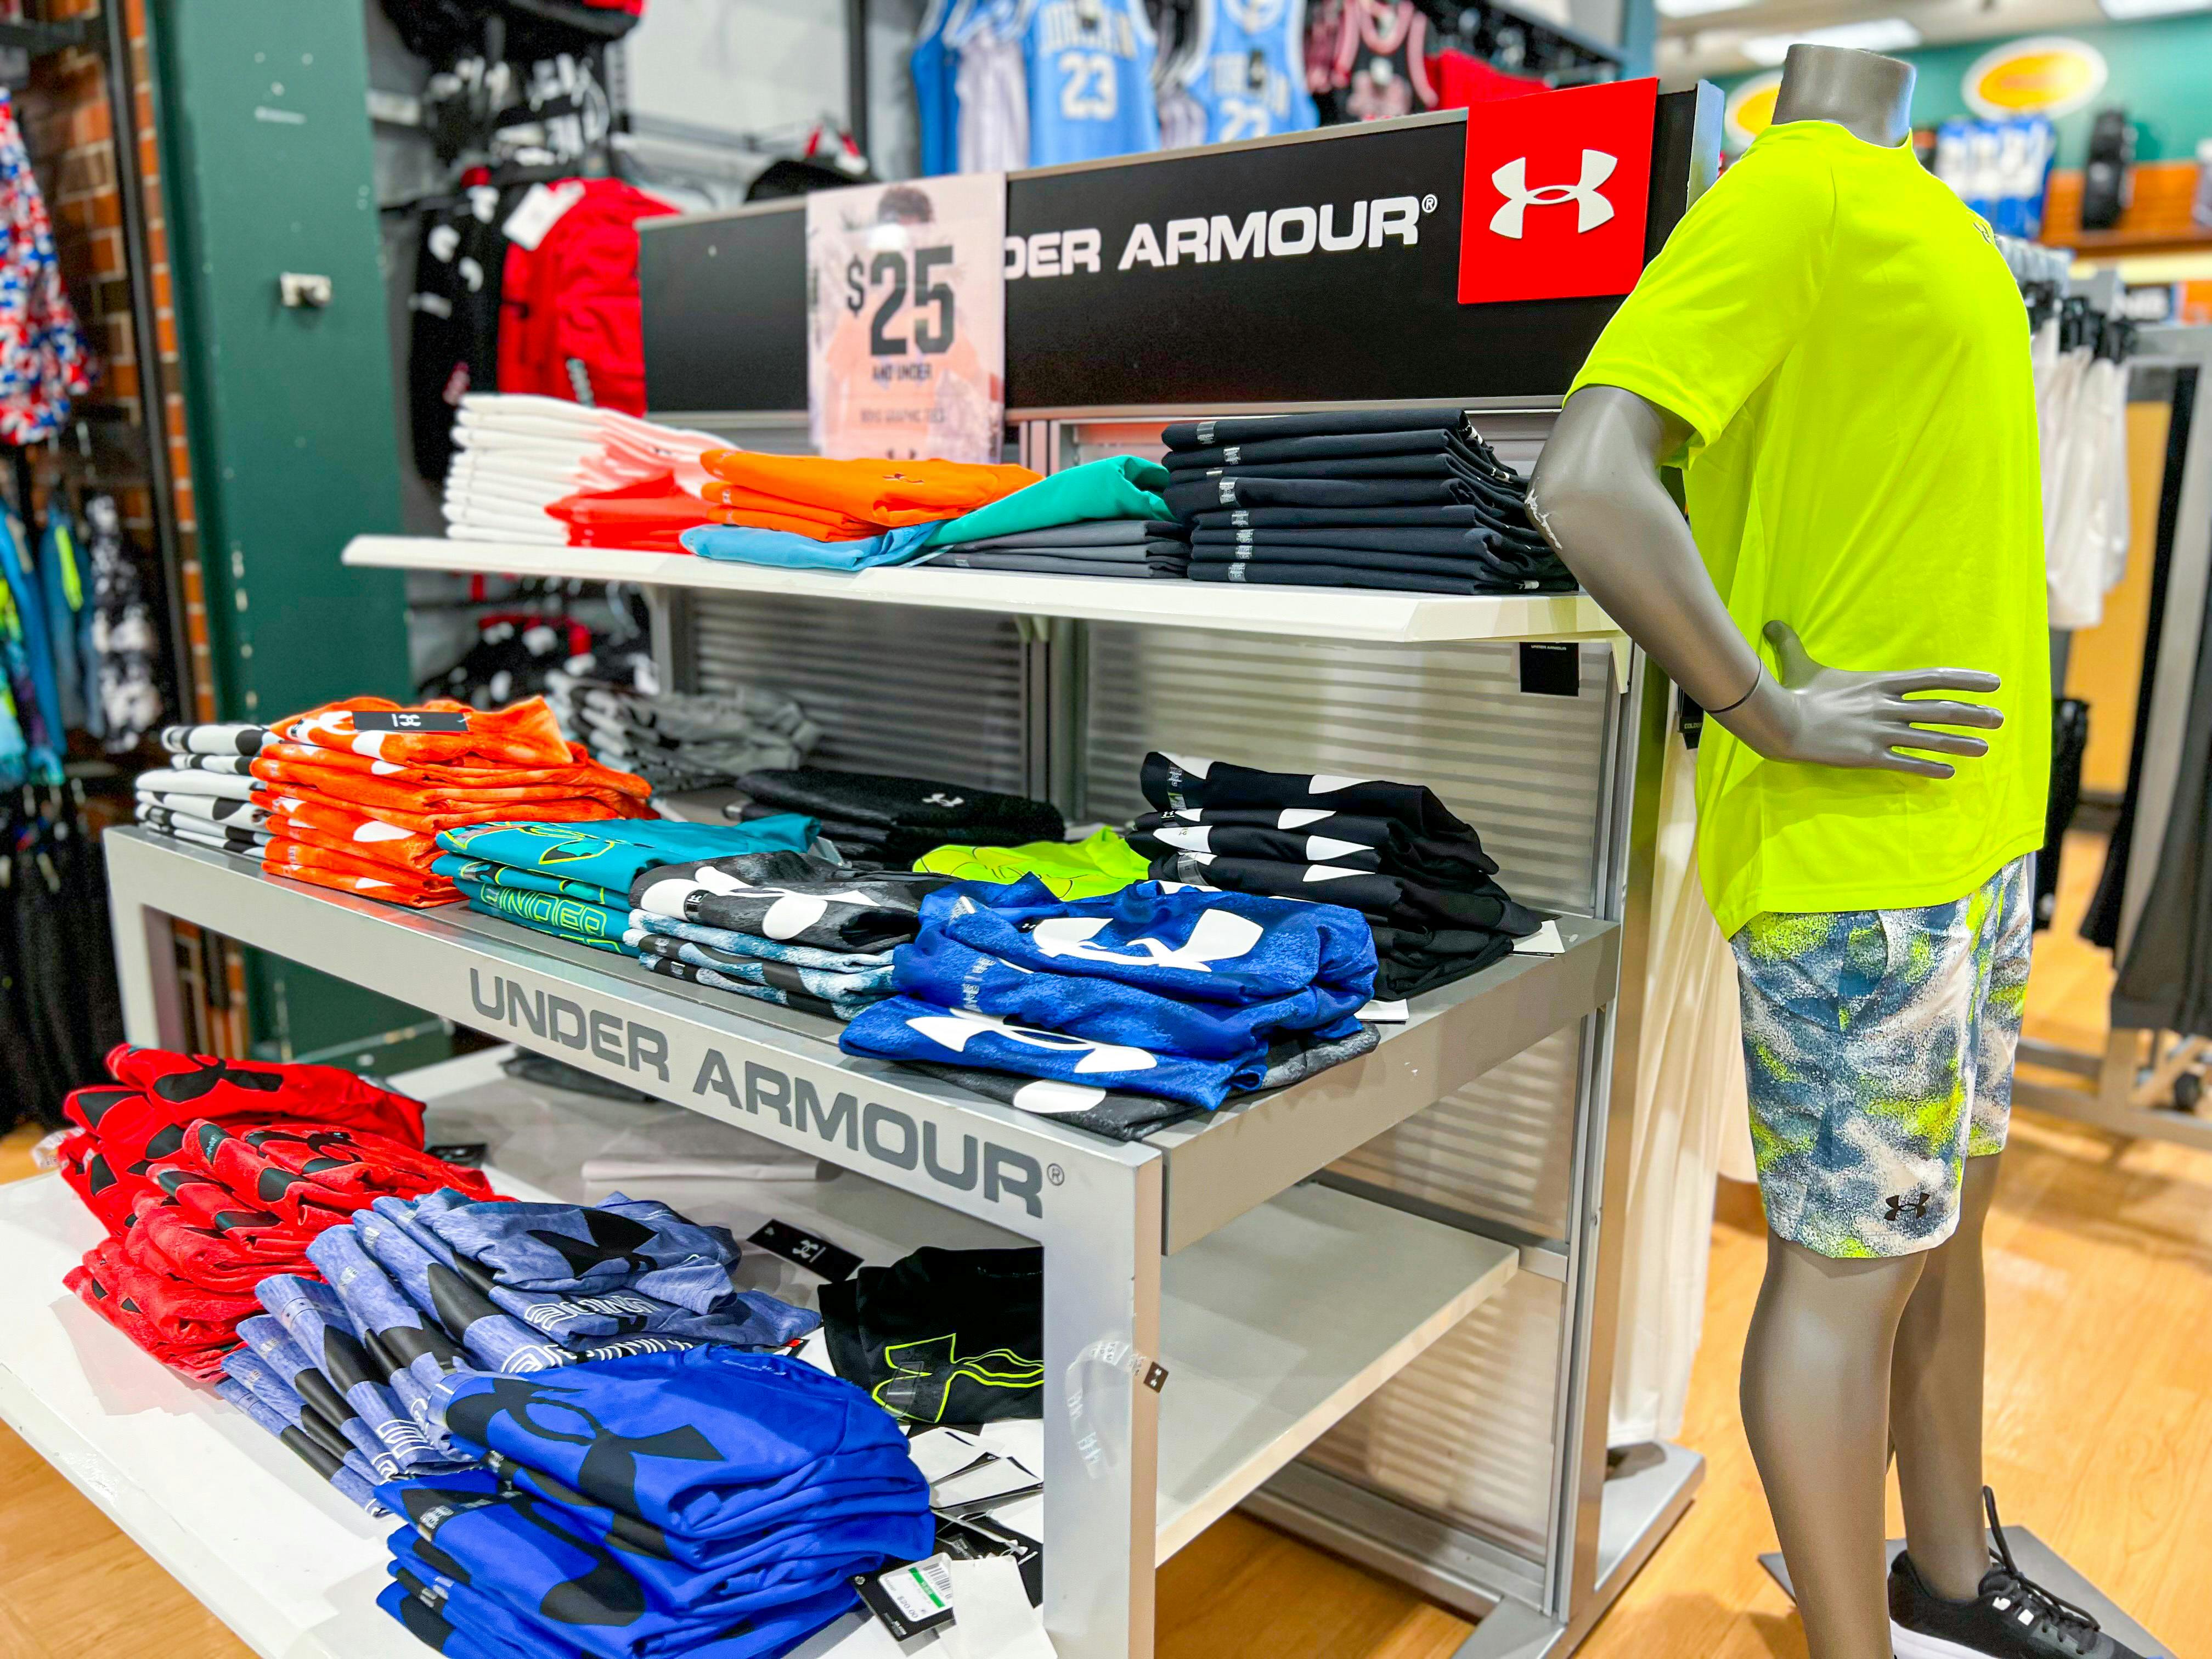 Under Armour Outlet is having a big sale on shoes and apparel 